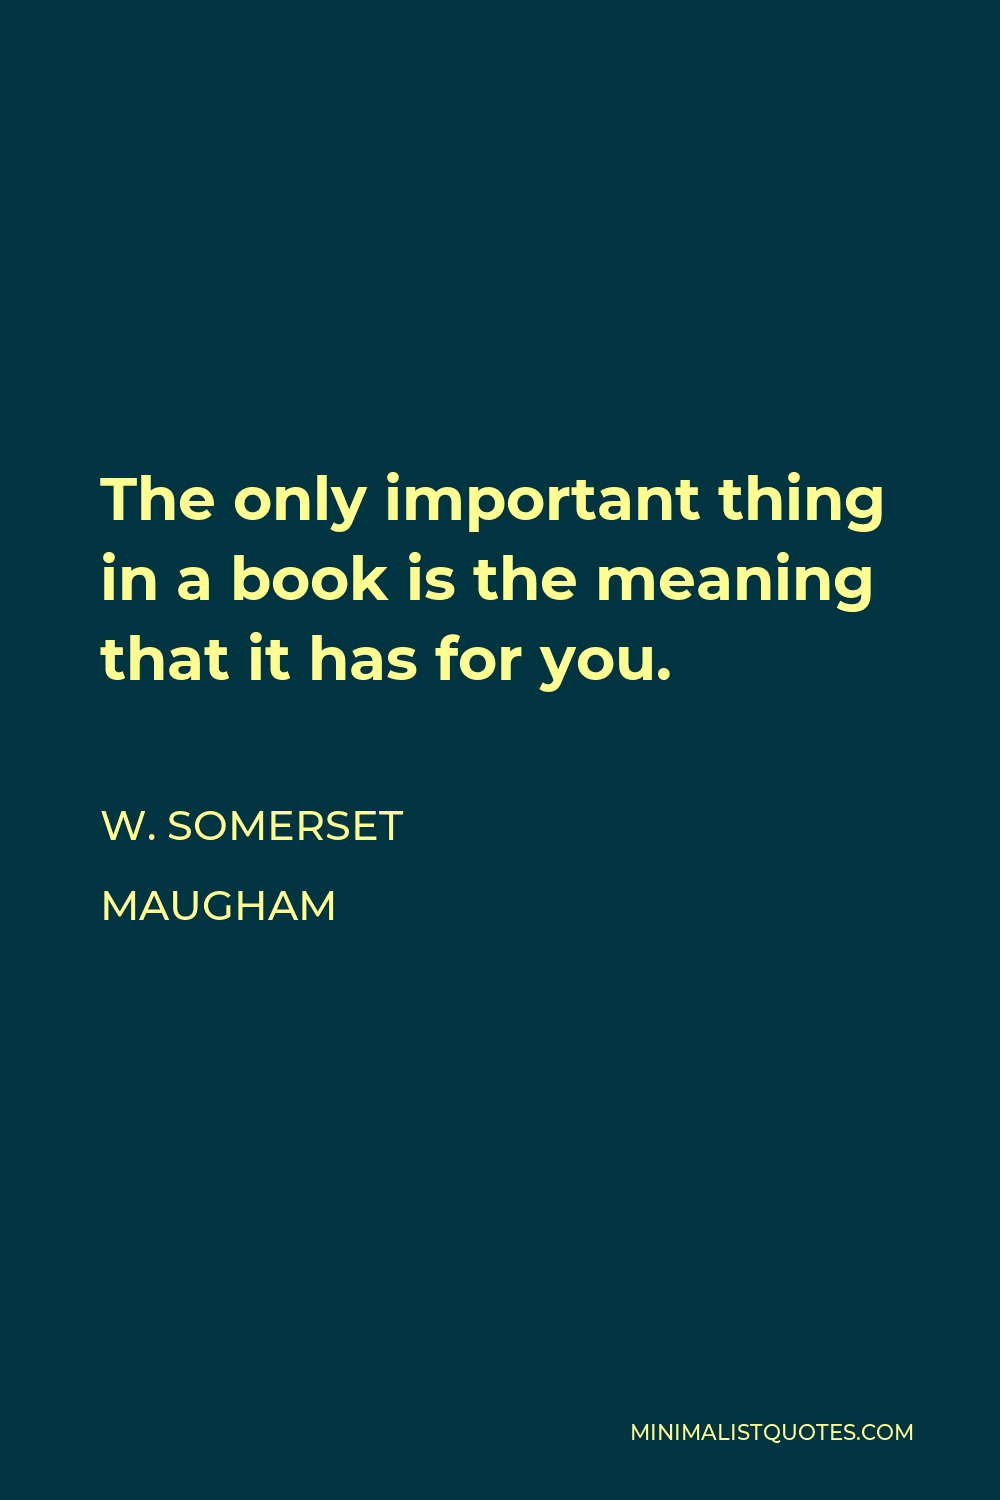 W. Somerset Maugham Quote - The only important thing in a book is the meaning that it has for you.